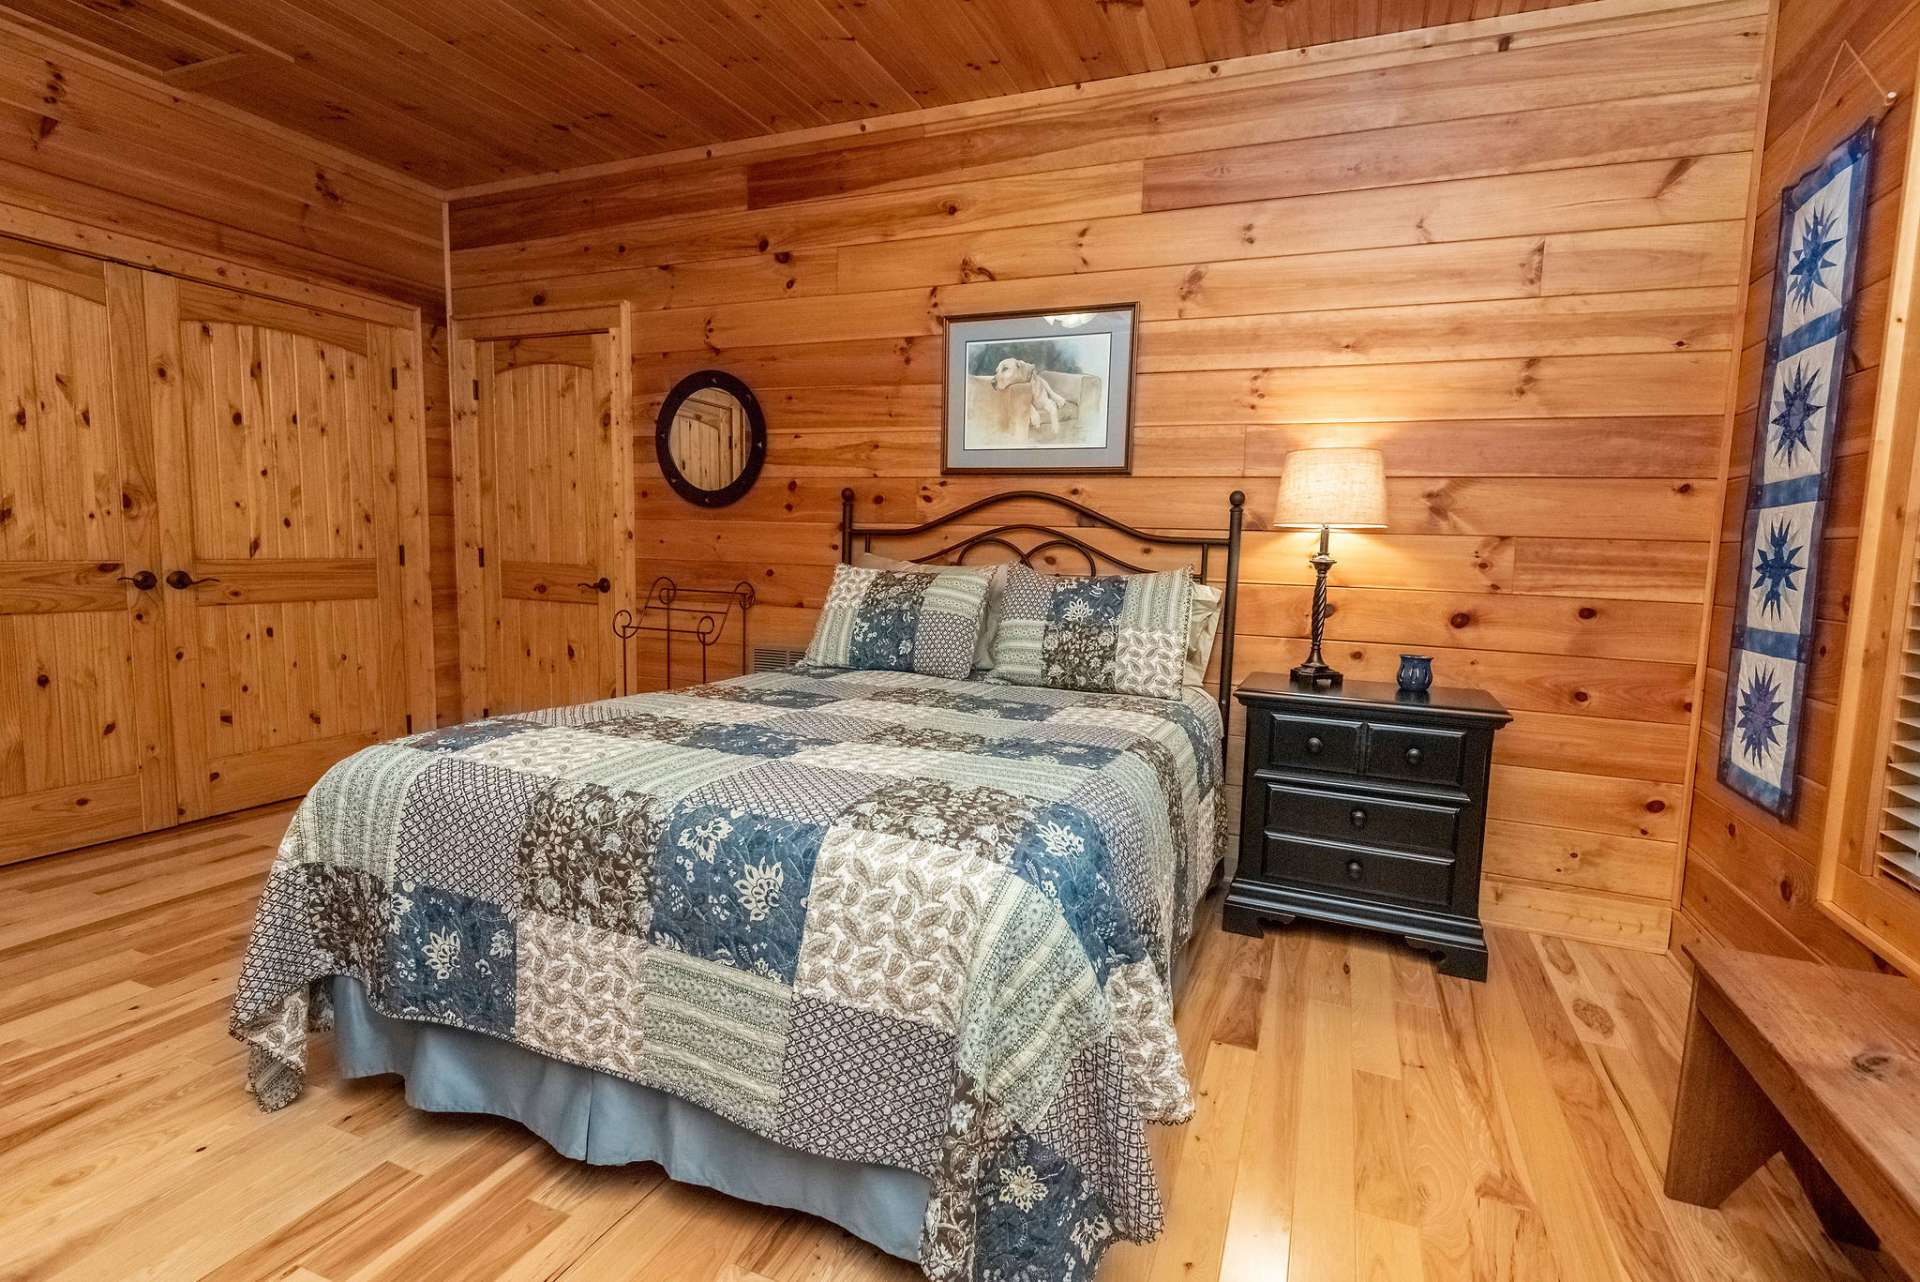 Both of the upper level bedrooms offer large closets and additional storage.